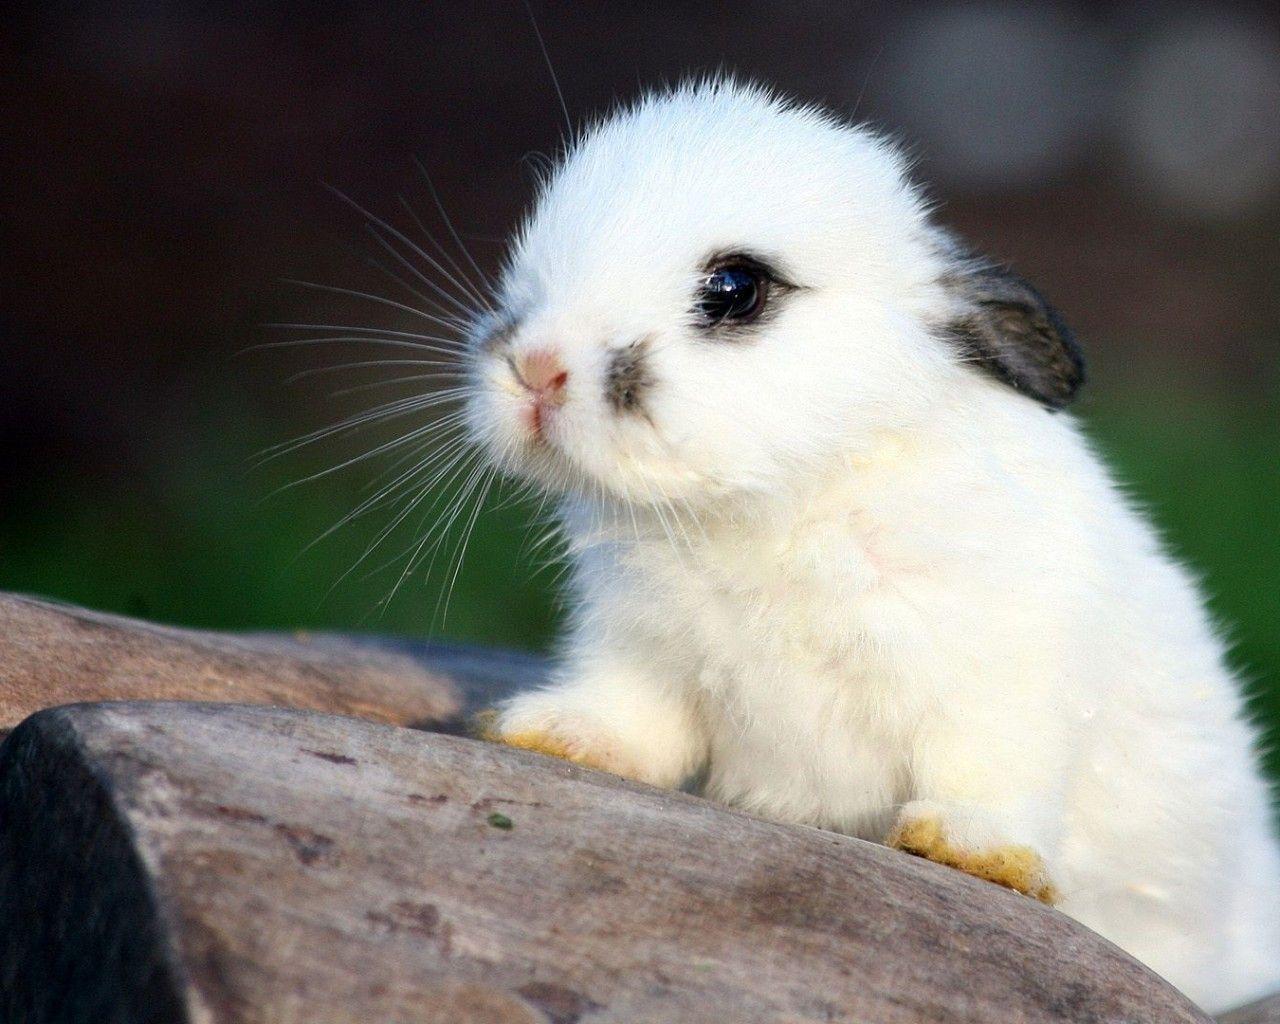 Cute White Baby Bunnies HD Picture 4 HD Wallpaper. lzamgs.com. Cute baby bunnies, Cute animals, Baby animals